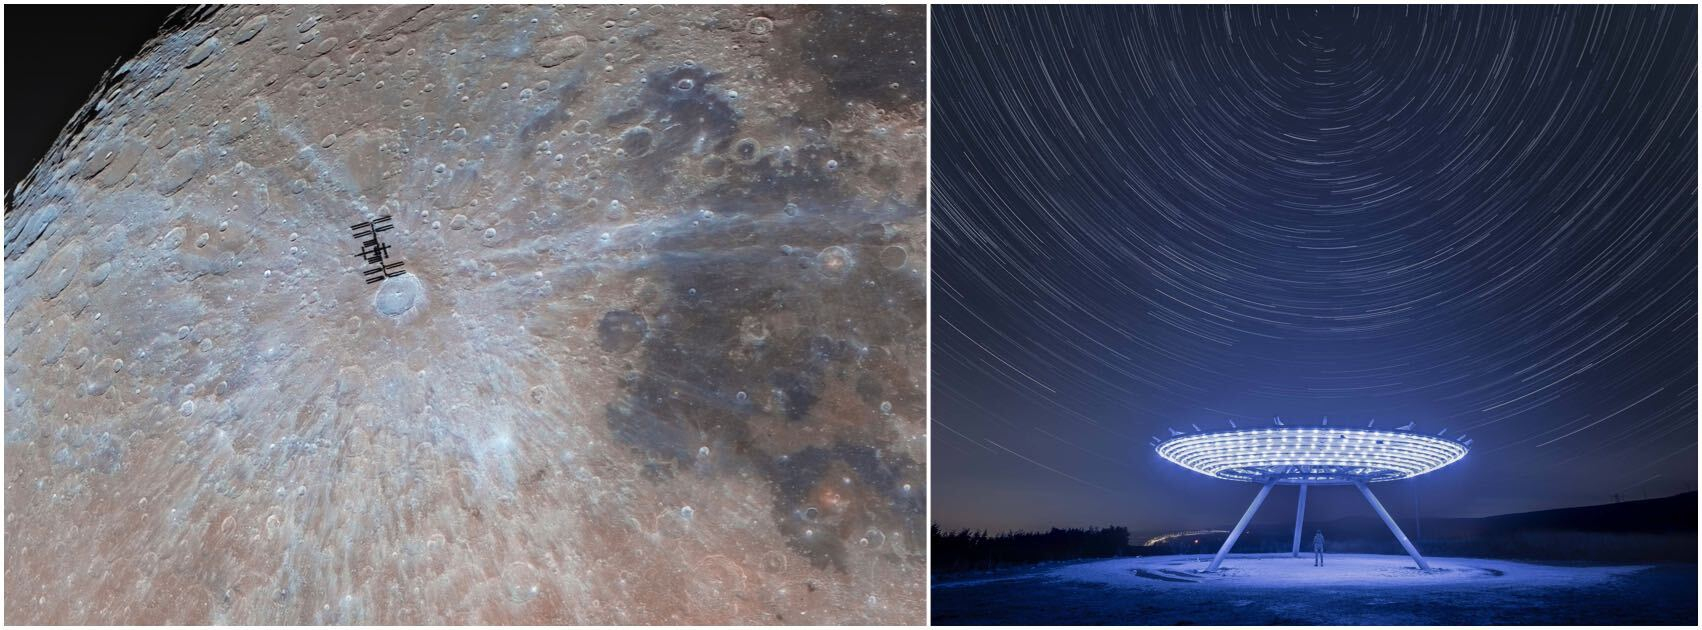 Images of the Moon with the International Space Station passing in front of it, and a blue radar-like dish beneath a sky full of star trails.